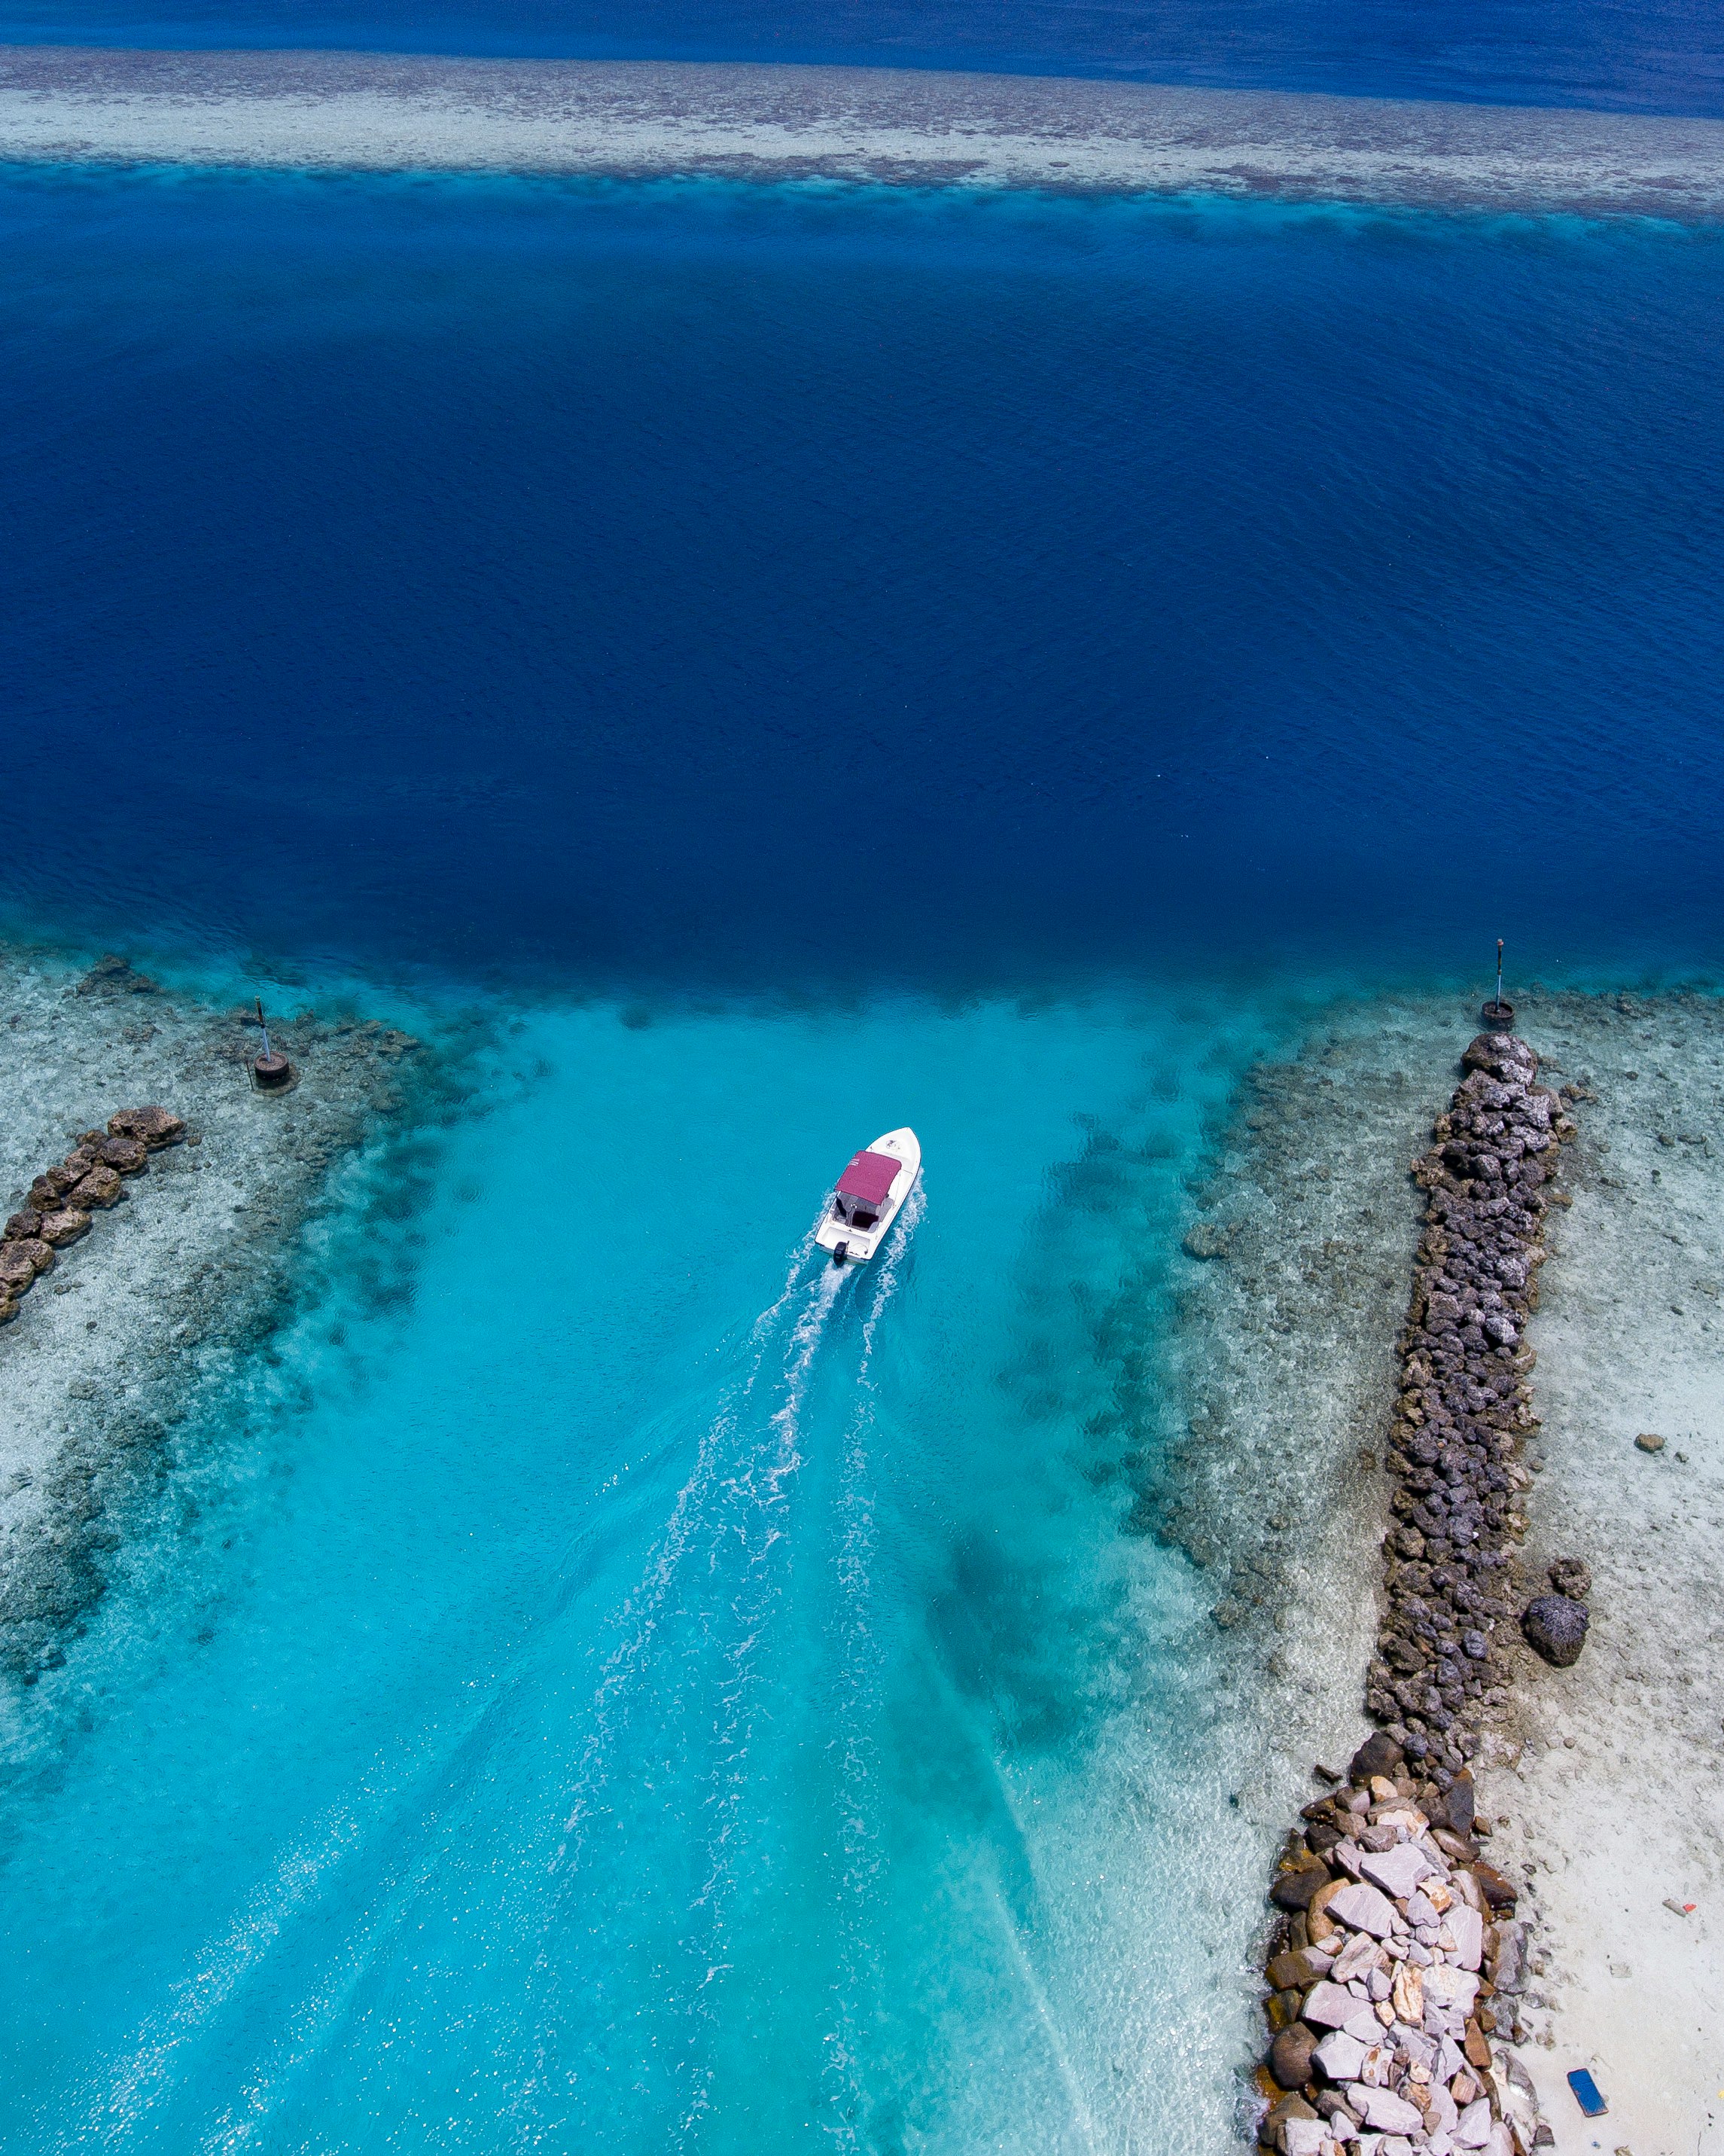 birds eye view of white boat on body of water